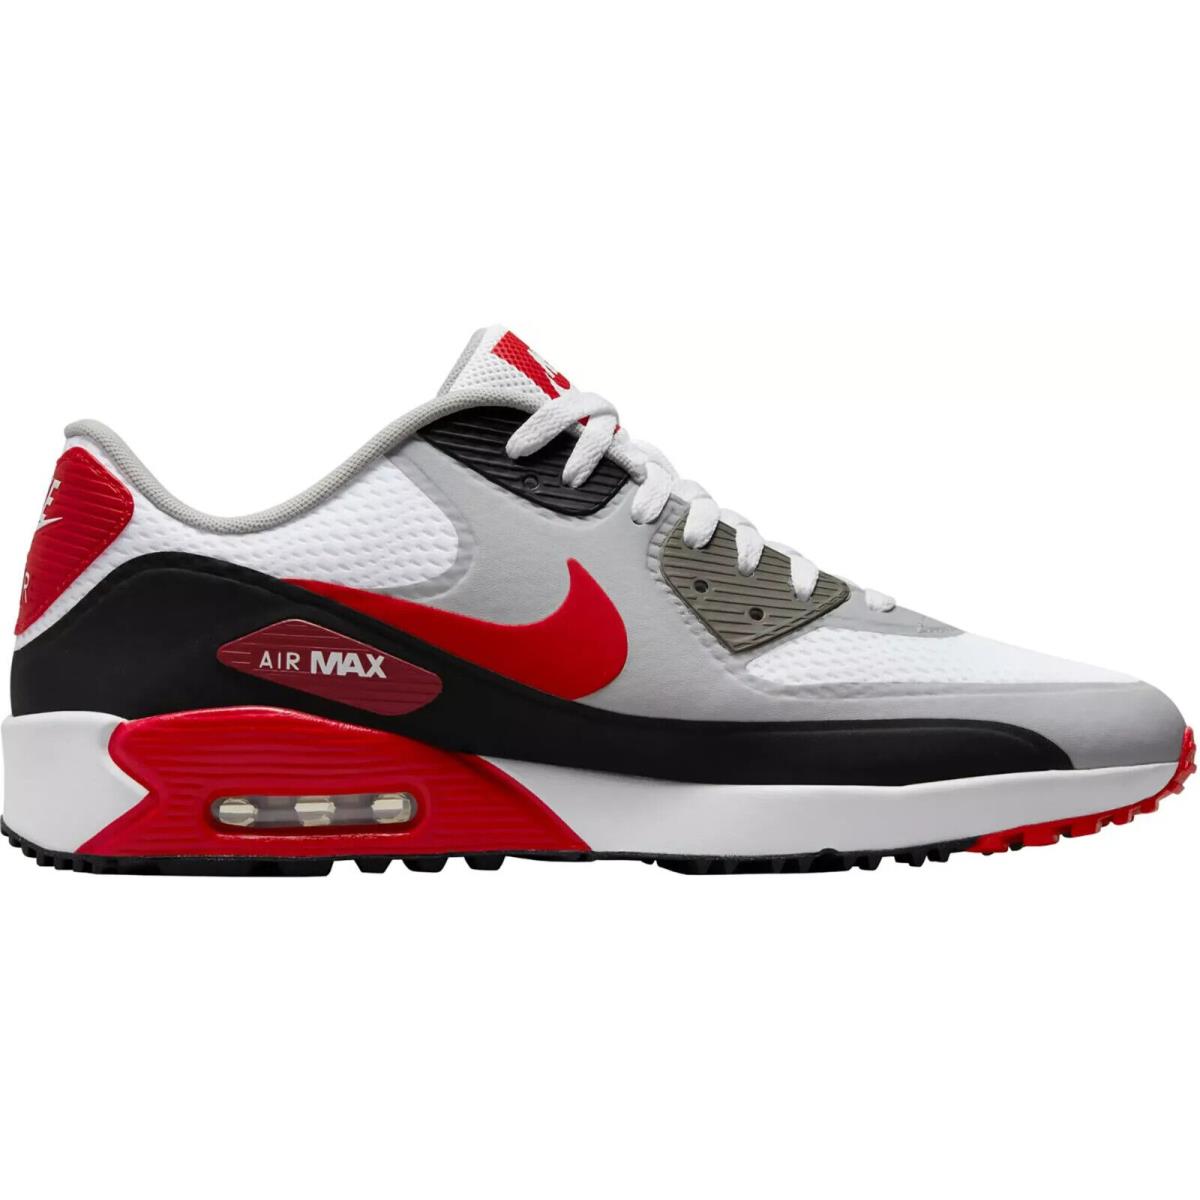 Nike Air Max 90 G Men`s Golf Shoes All Colors US Sizes 7-14 White/Black/Photon Dust/University Red